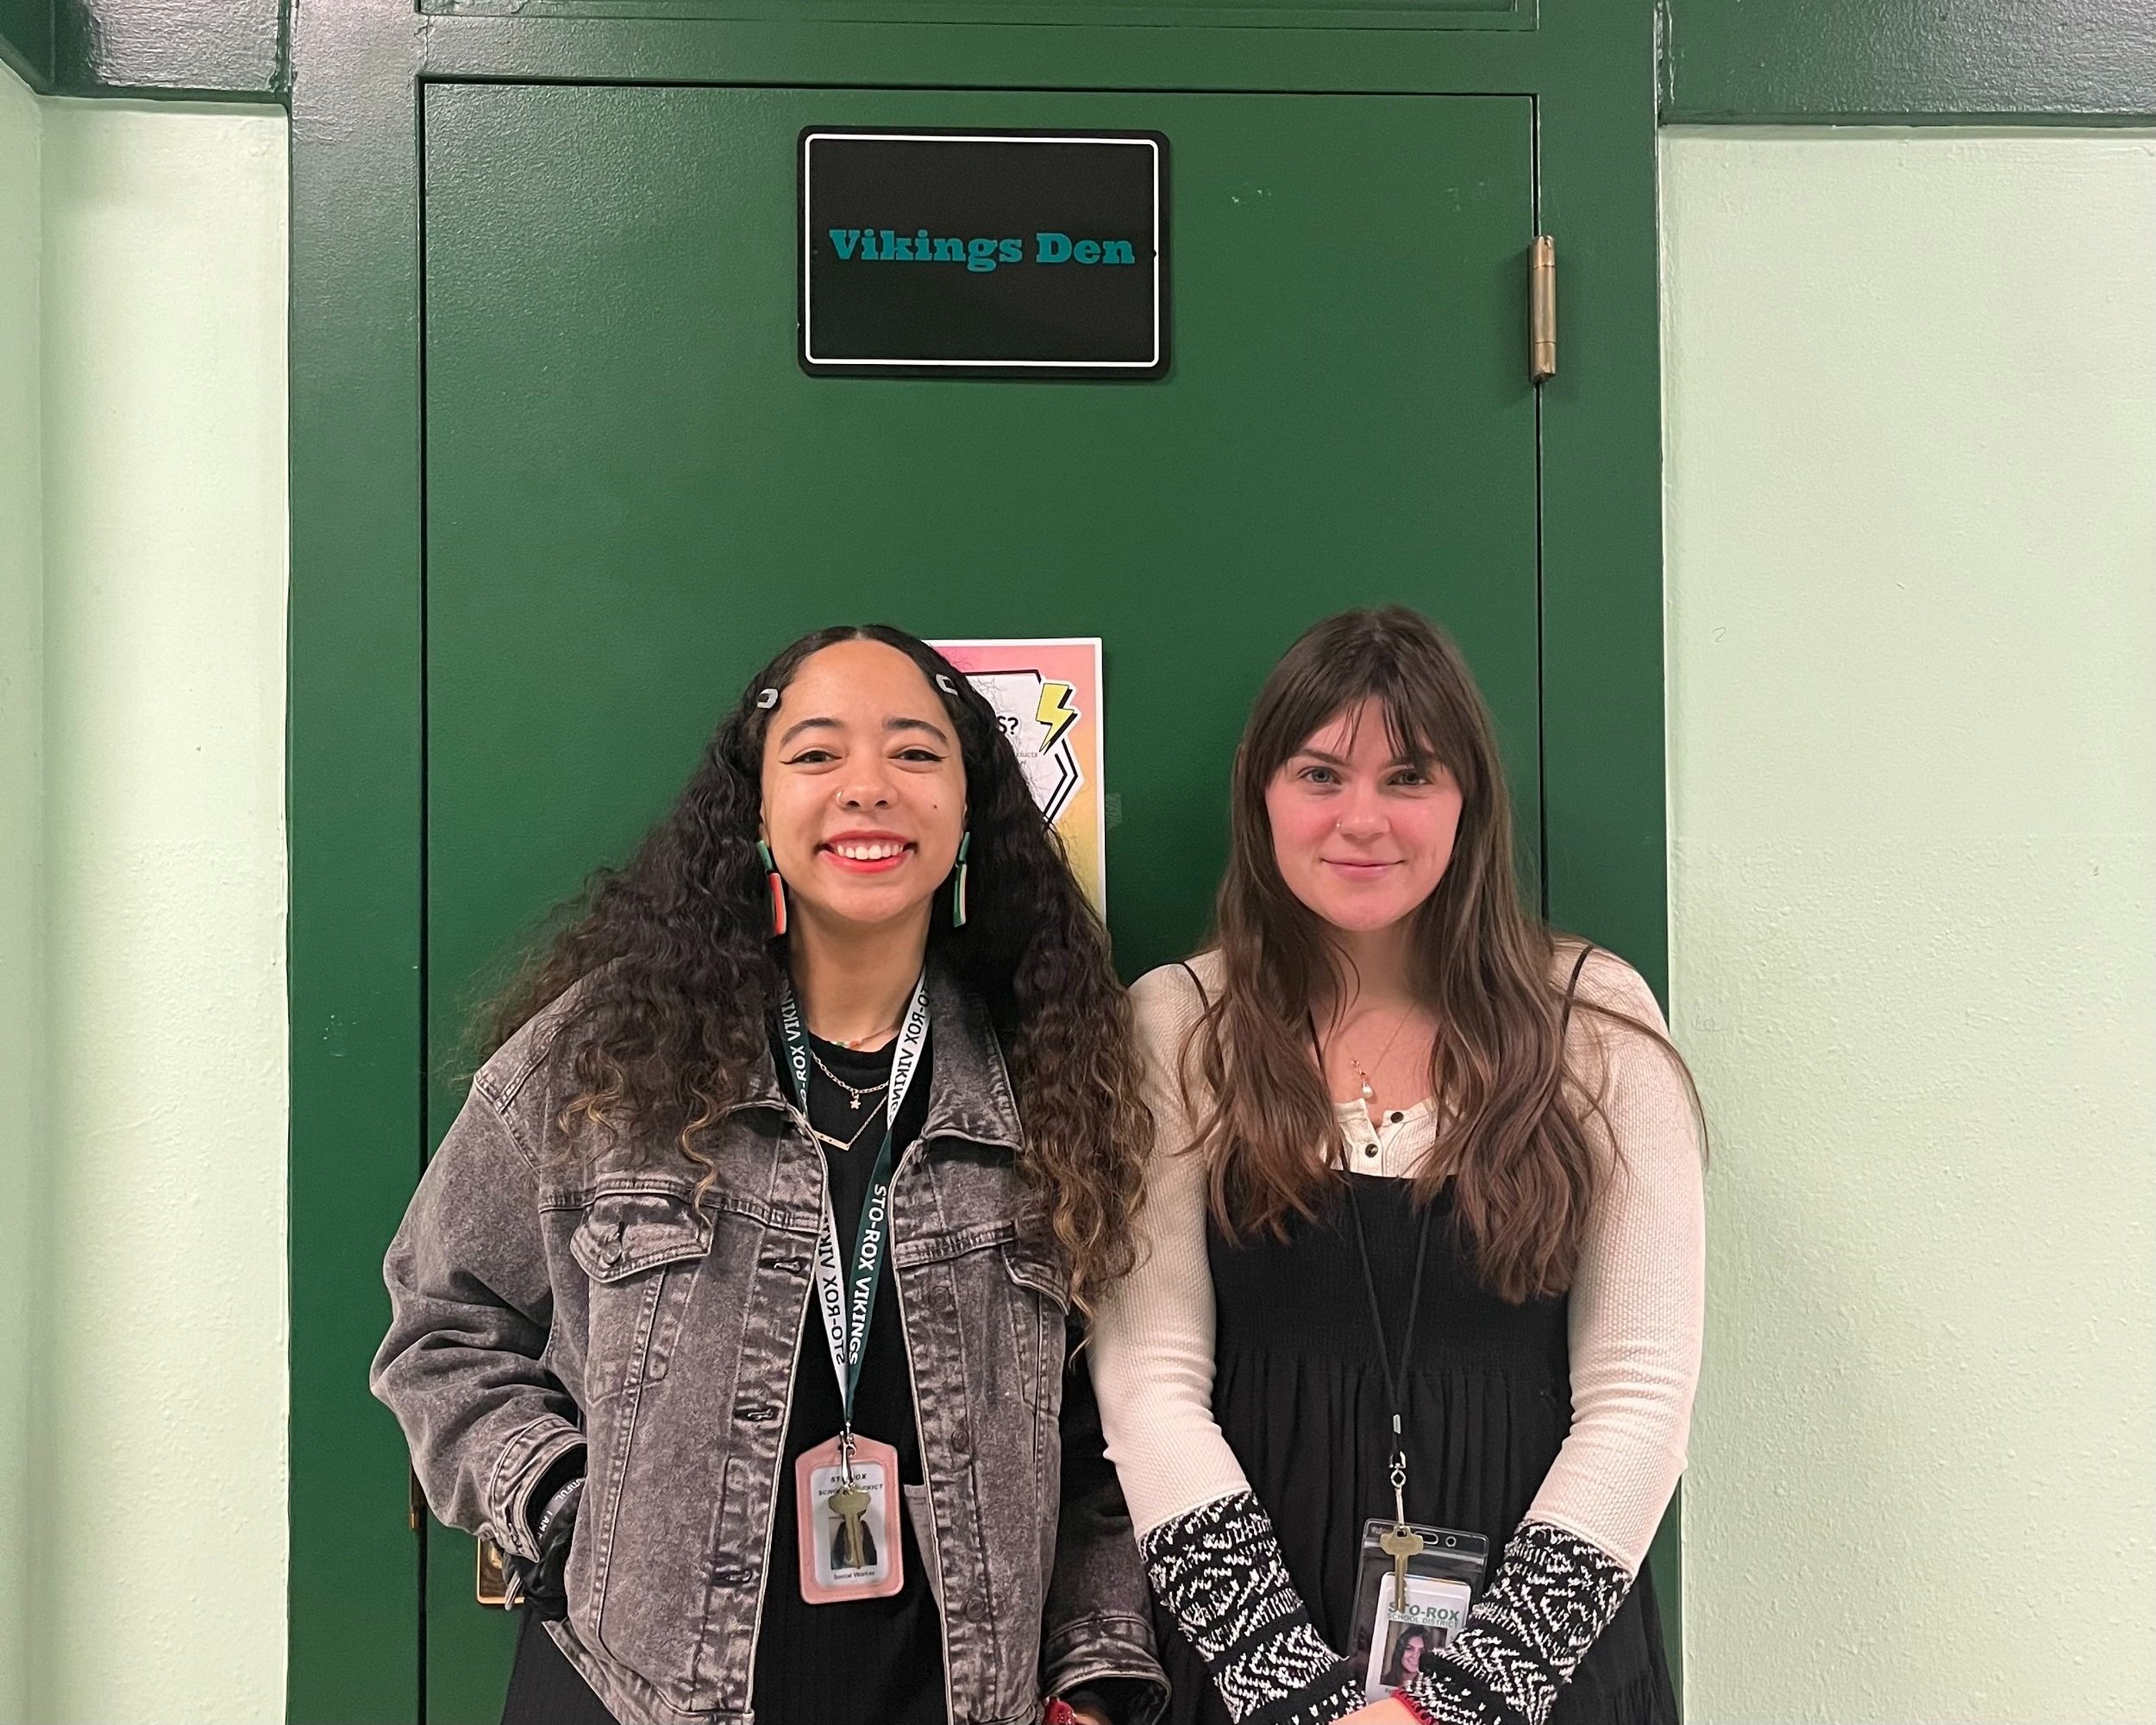  Alexandria Gariepy (L) and Sydney Dominick (R) stand in front of the entrance to the Vikings Den. 